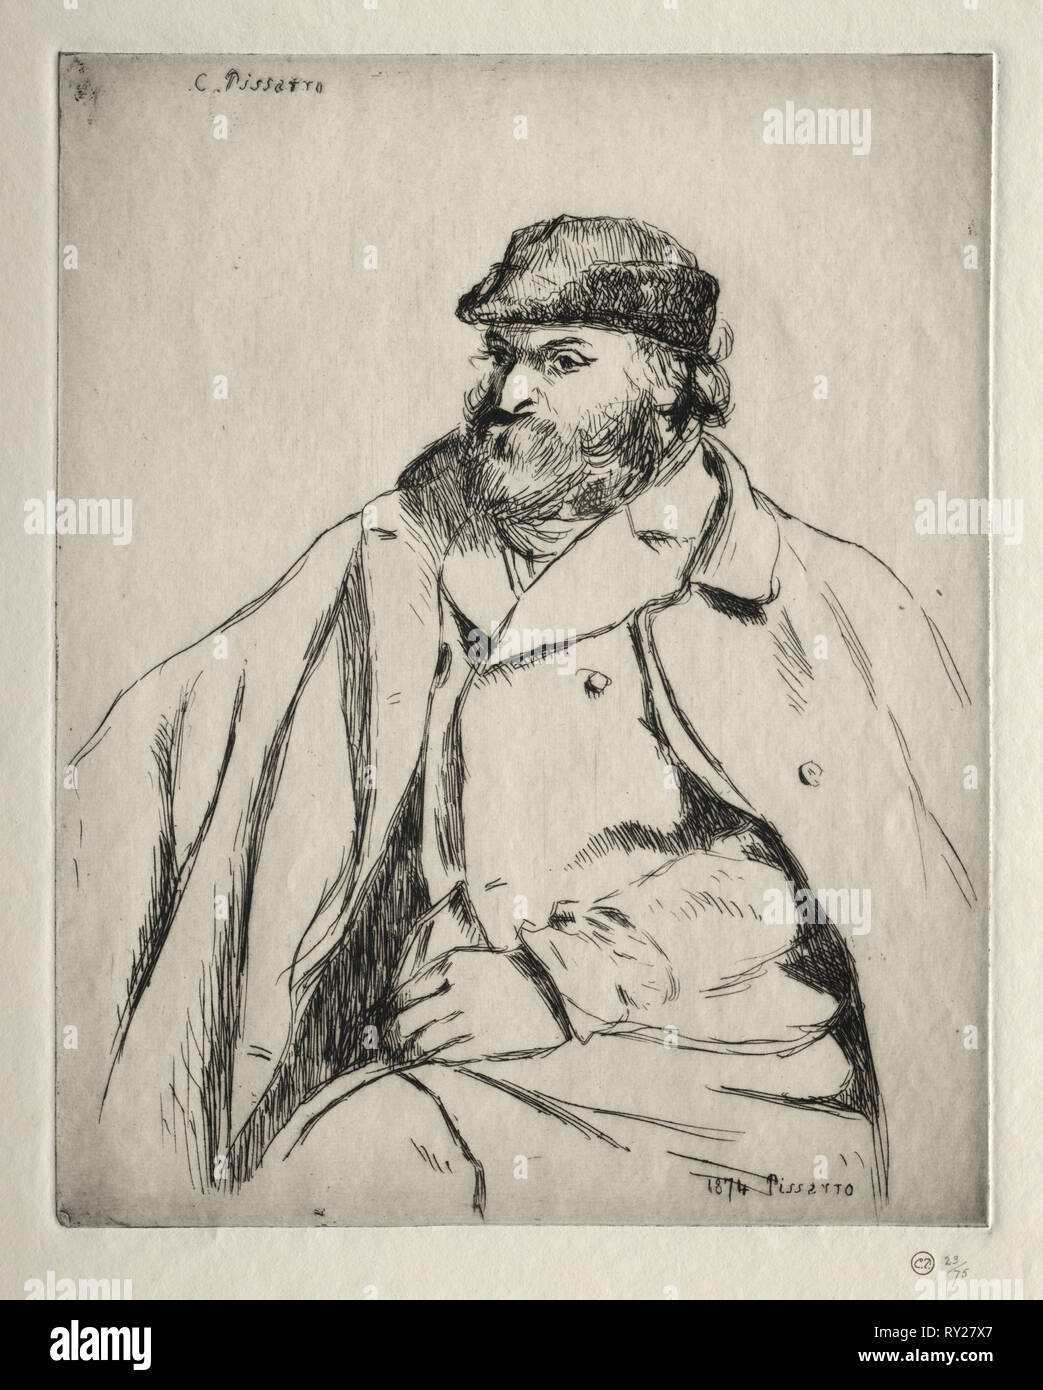 Paul Cézanne, 1874. Camille Pissarro (French, 1830-1903). Etching Stock Photo